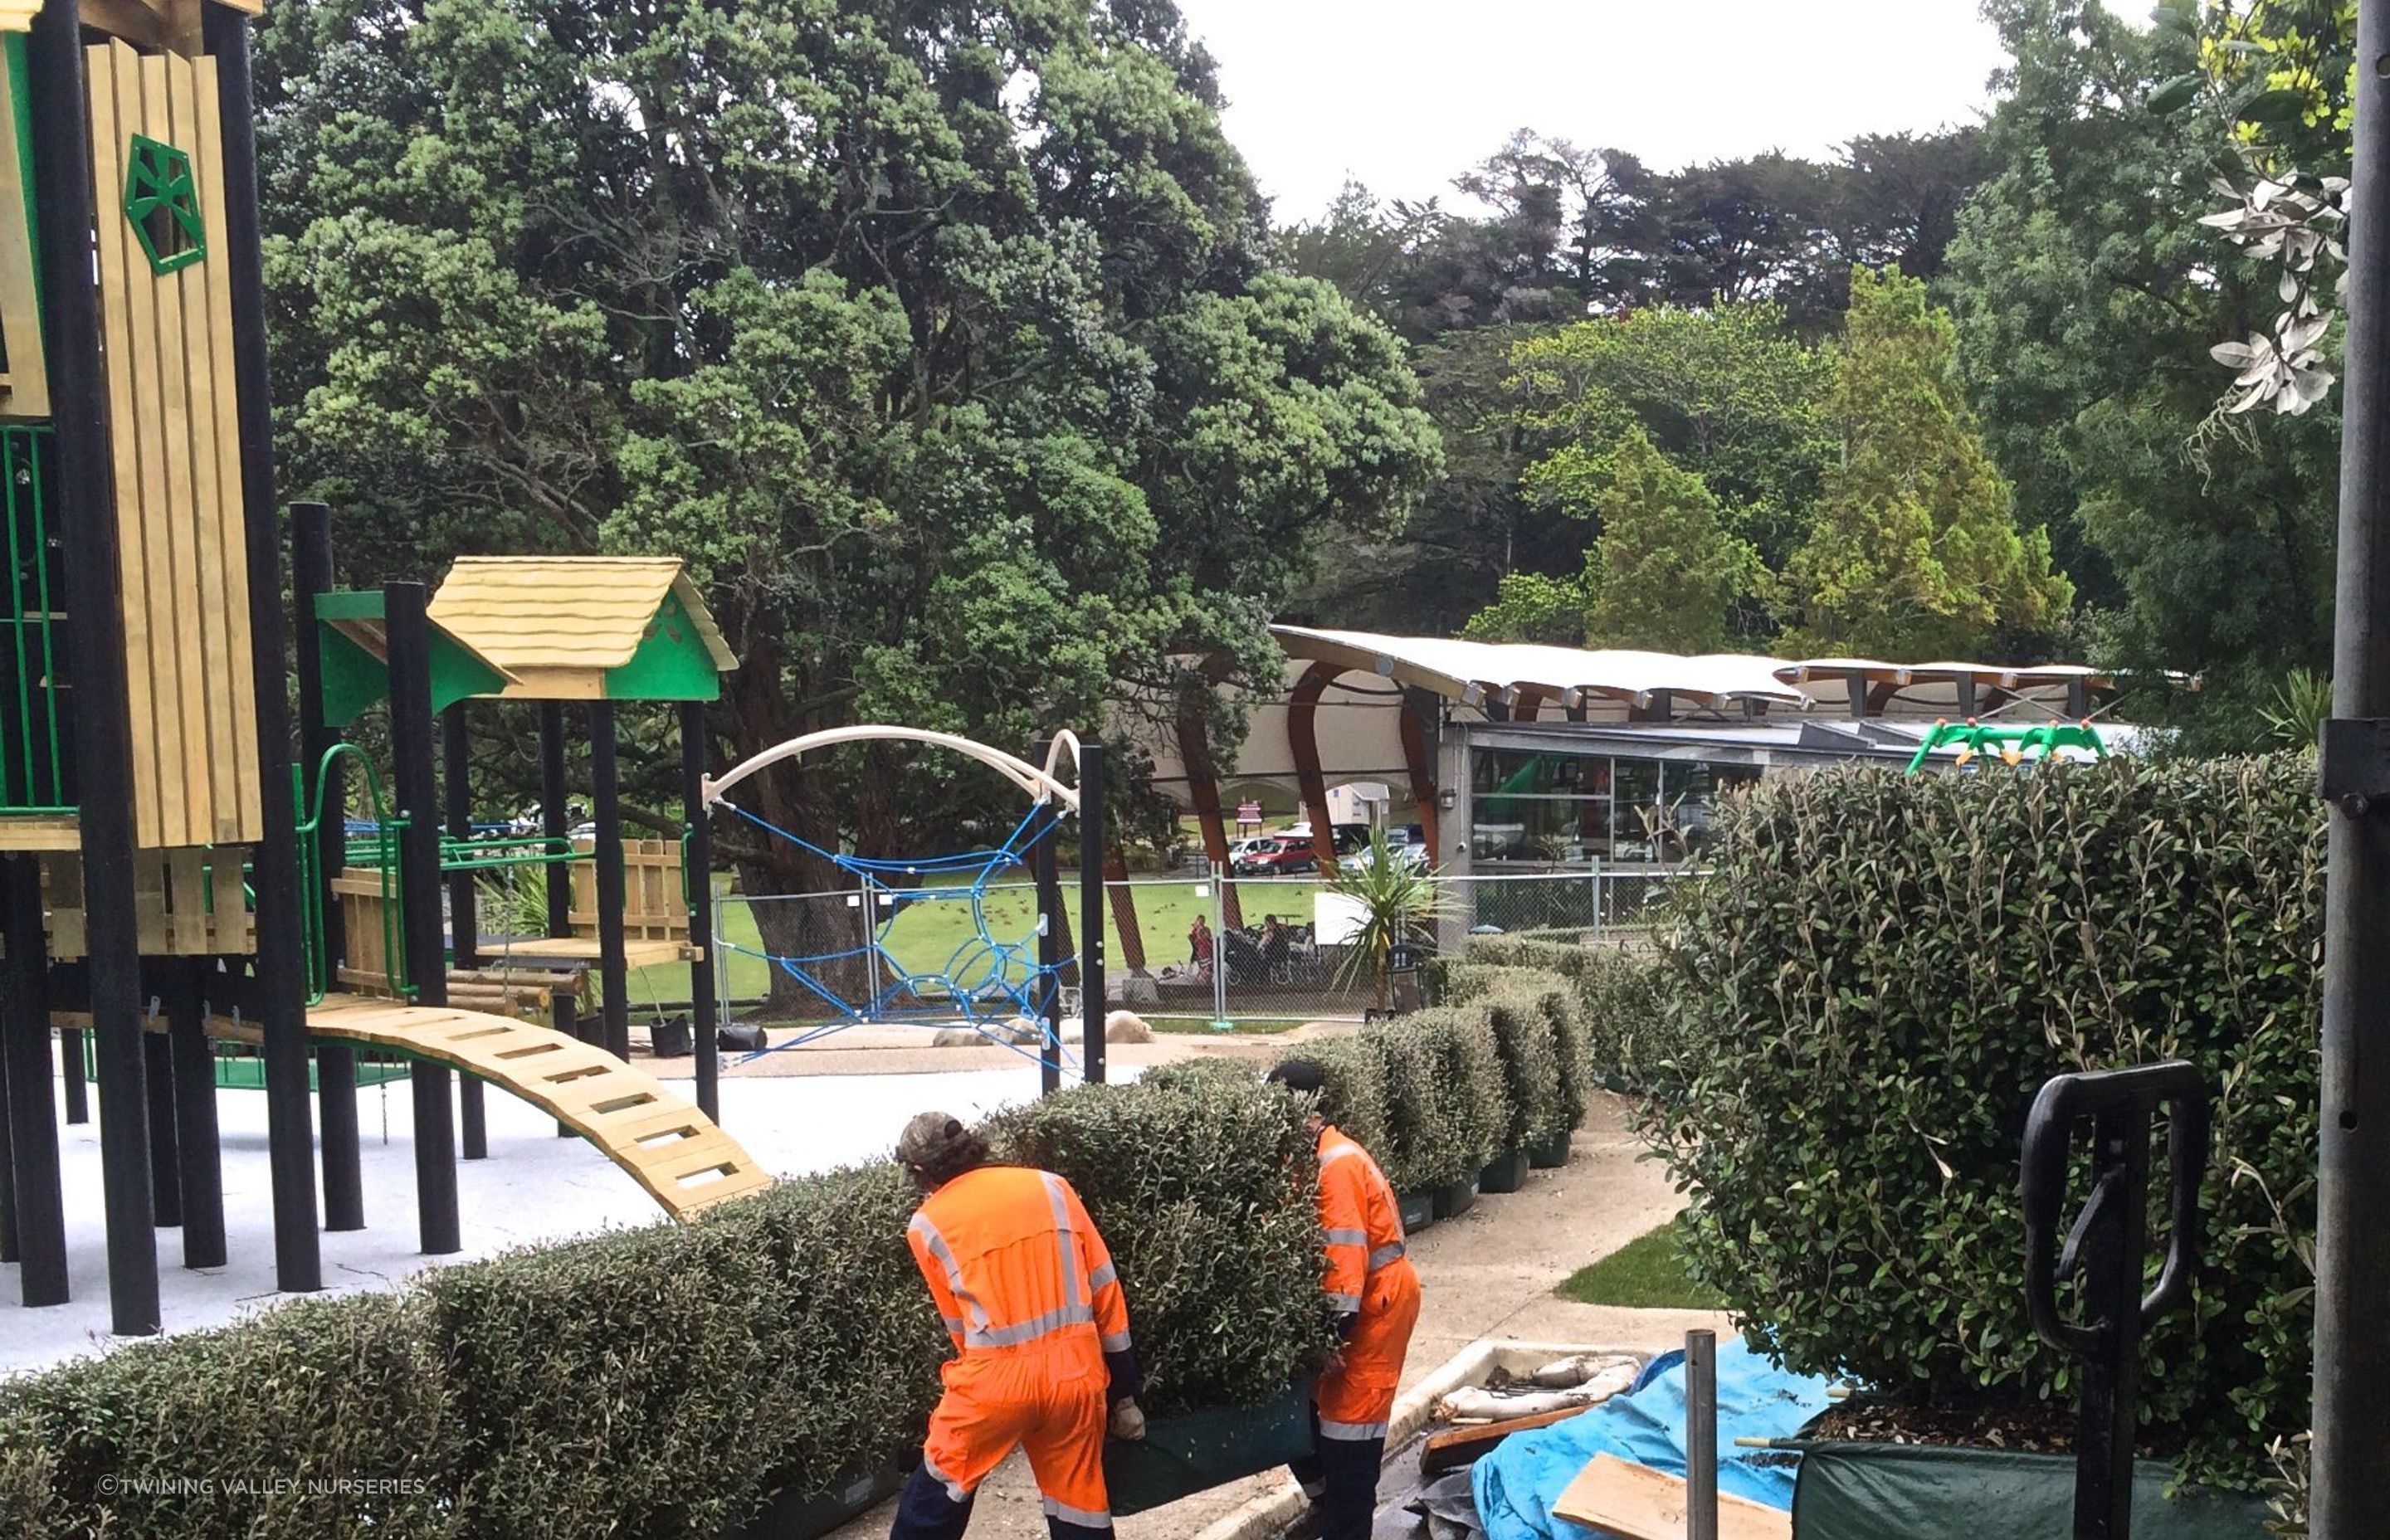 Adding the final touches. Living Walls™ instant hedges create a natural barrier between the playground and pedestrians.